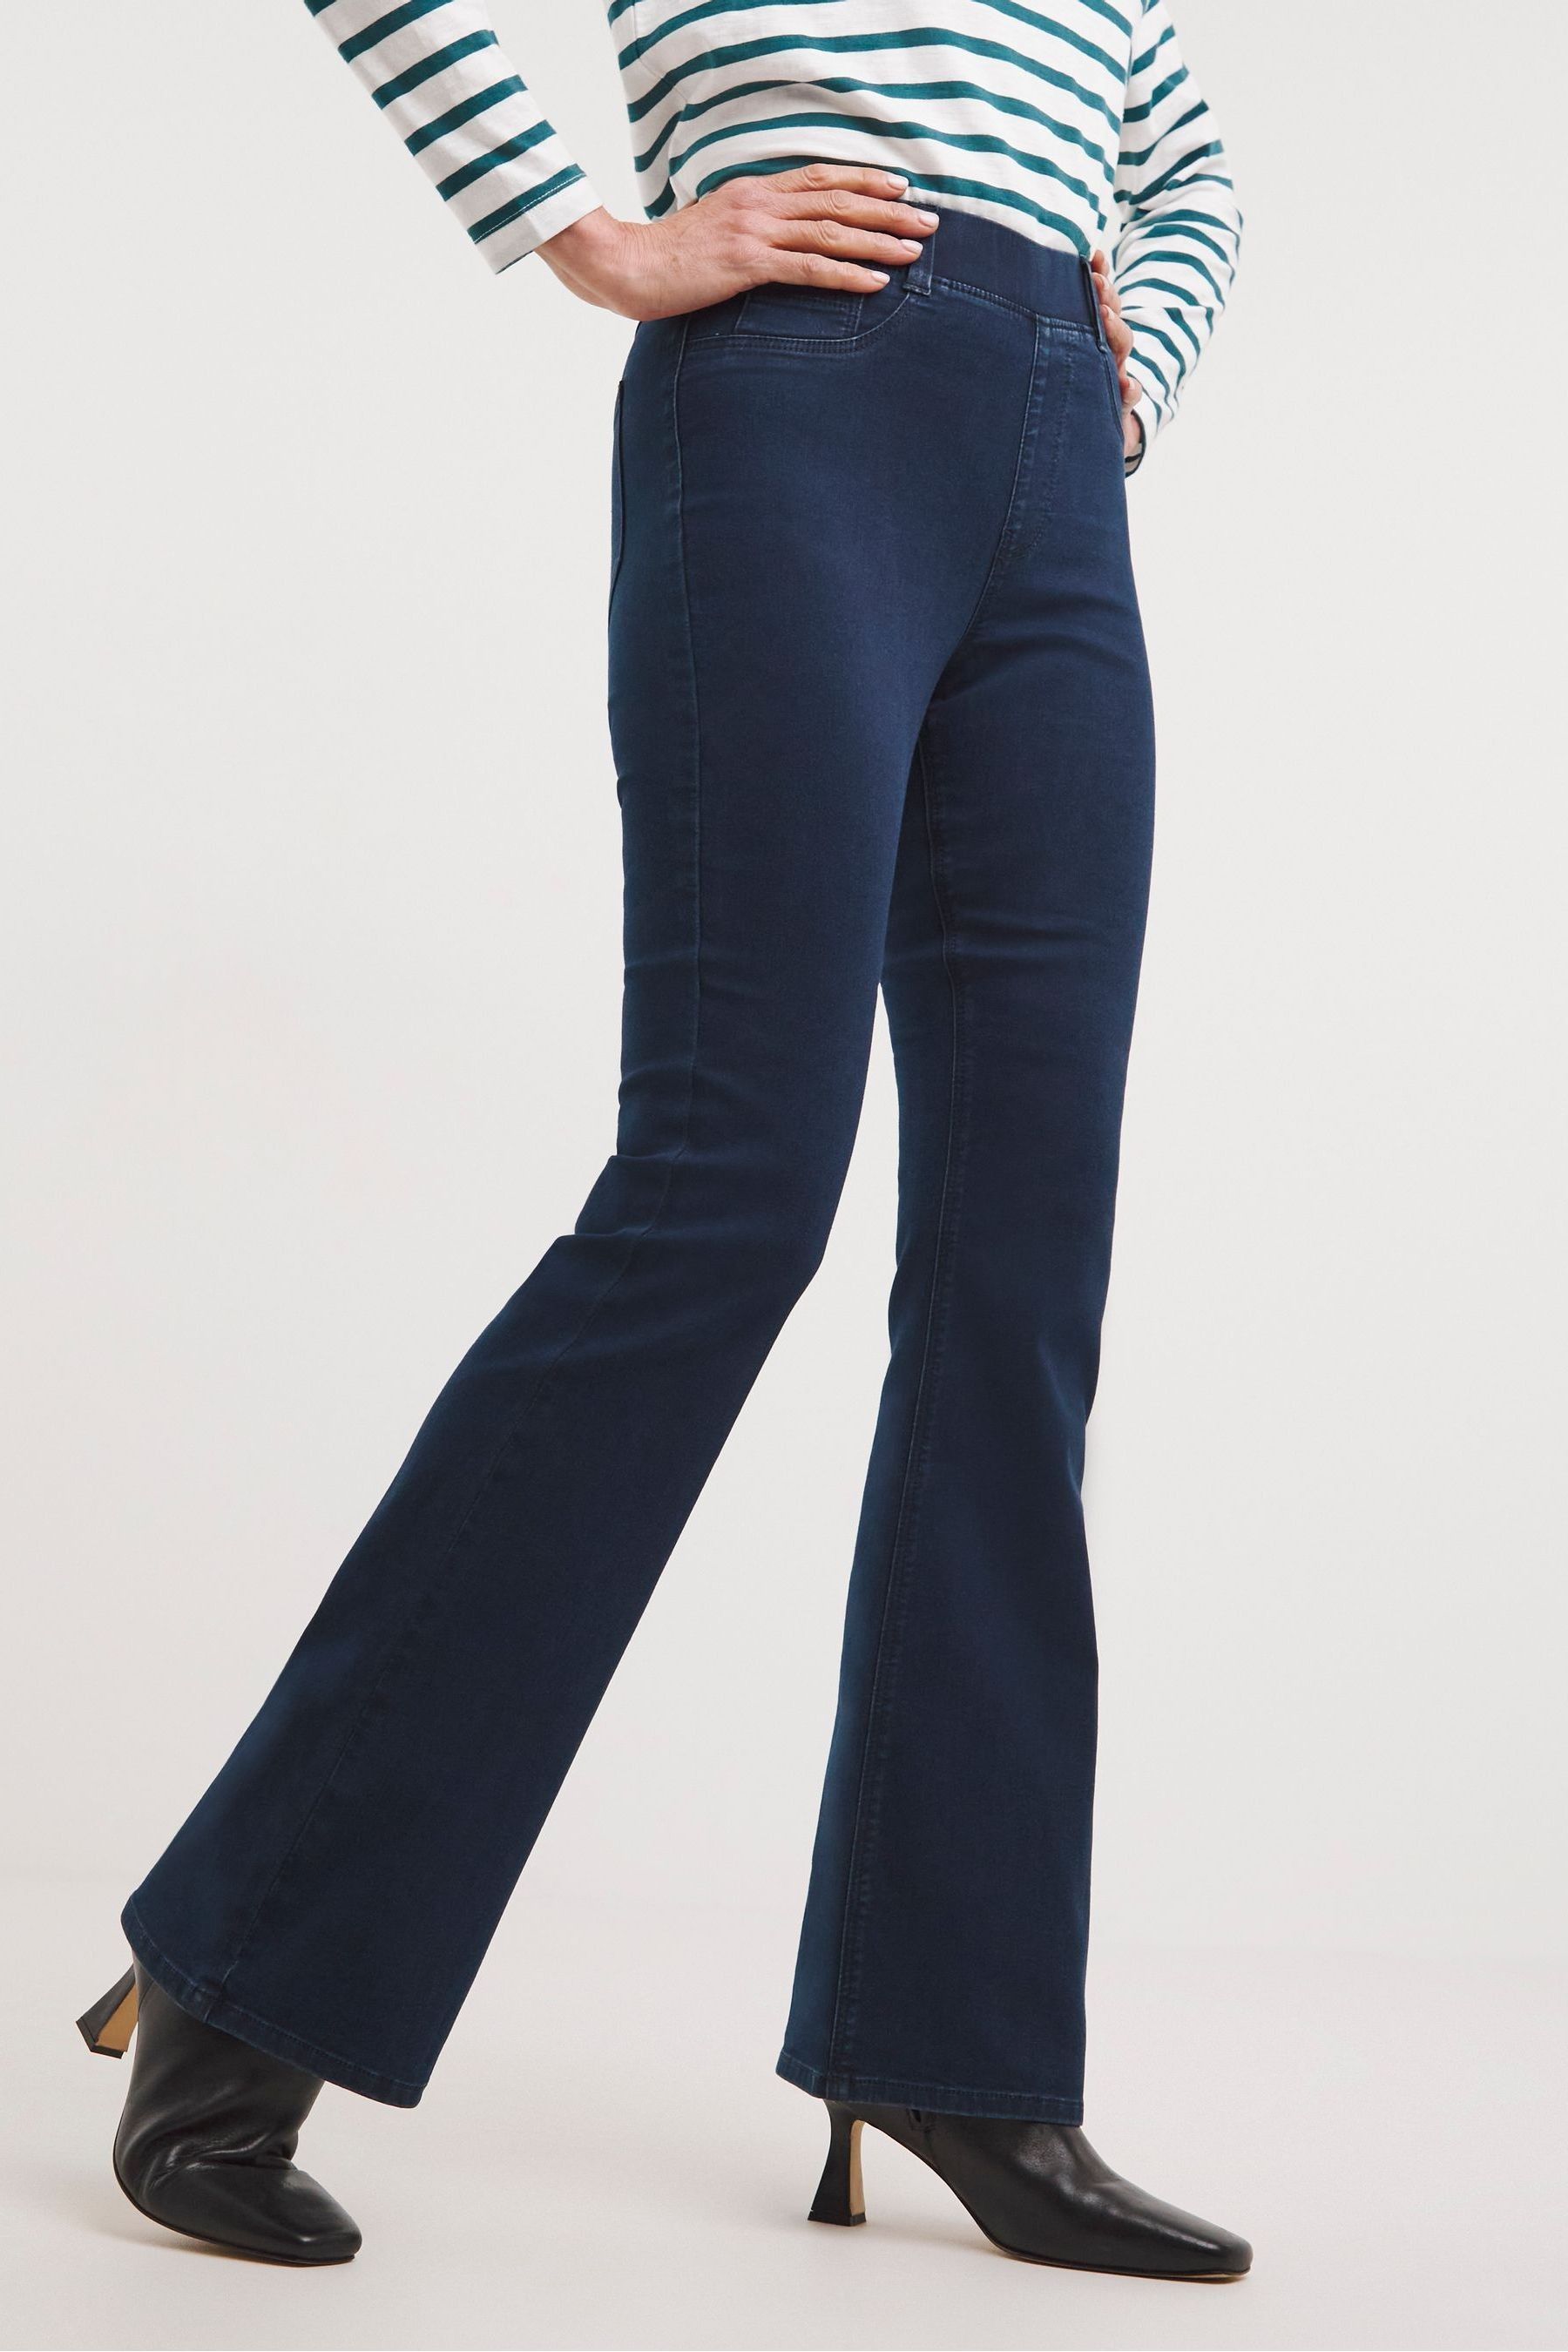 Buy JD Williams Indigo Blue Bootcut Jeggings from the Next UK online shop